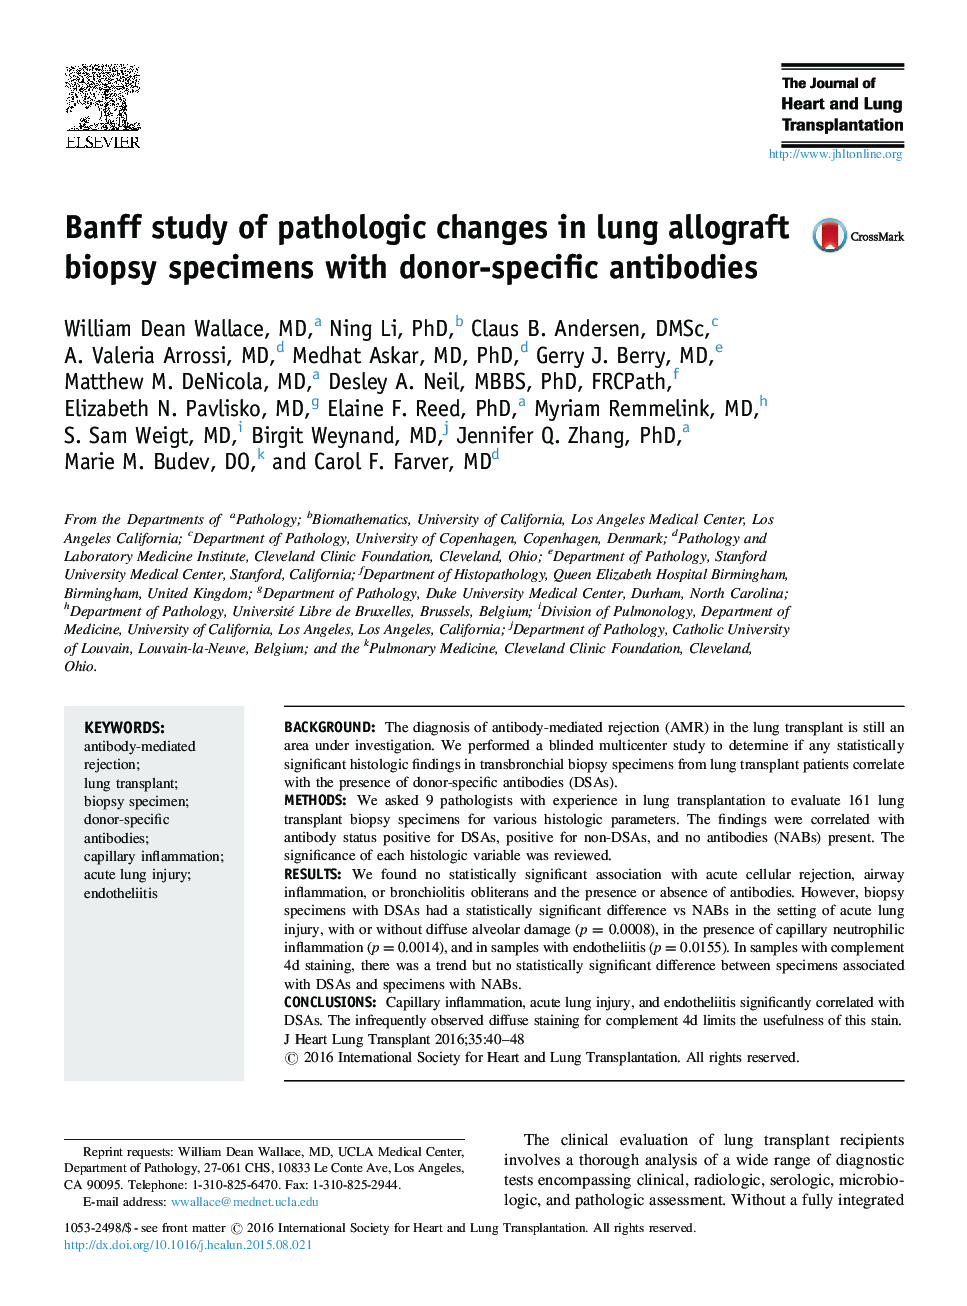 Banff study of pathologic changes in lung allograft biopsy specimens with donor-specific antibodies